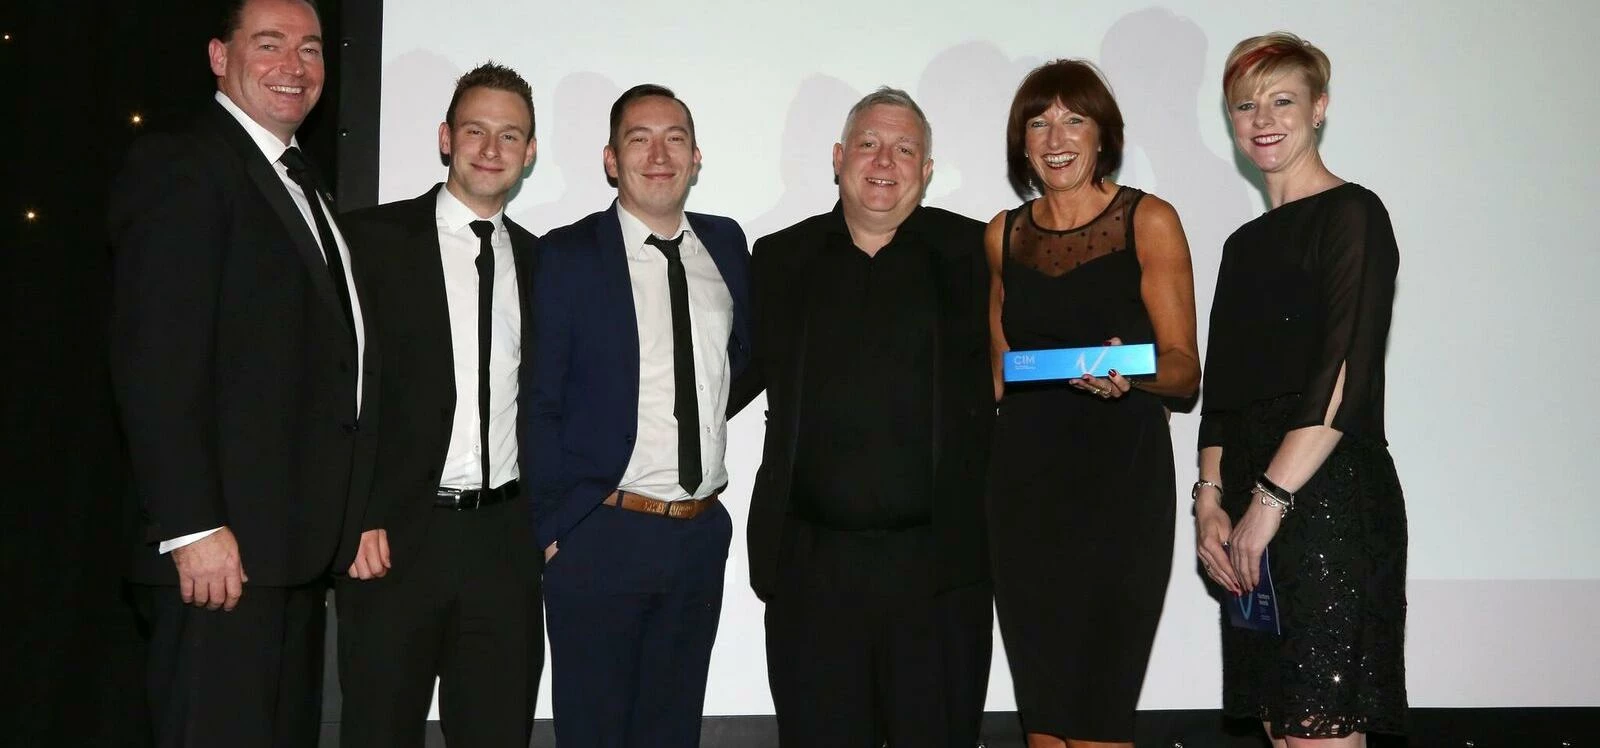 Image caption: Left to Right: Ian Dinning from Lookers plc, sponsor, the FIG team and Sally Steadman